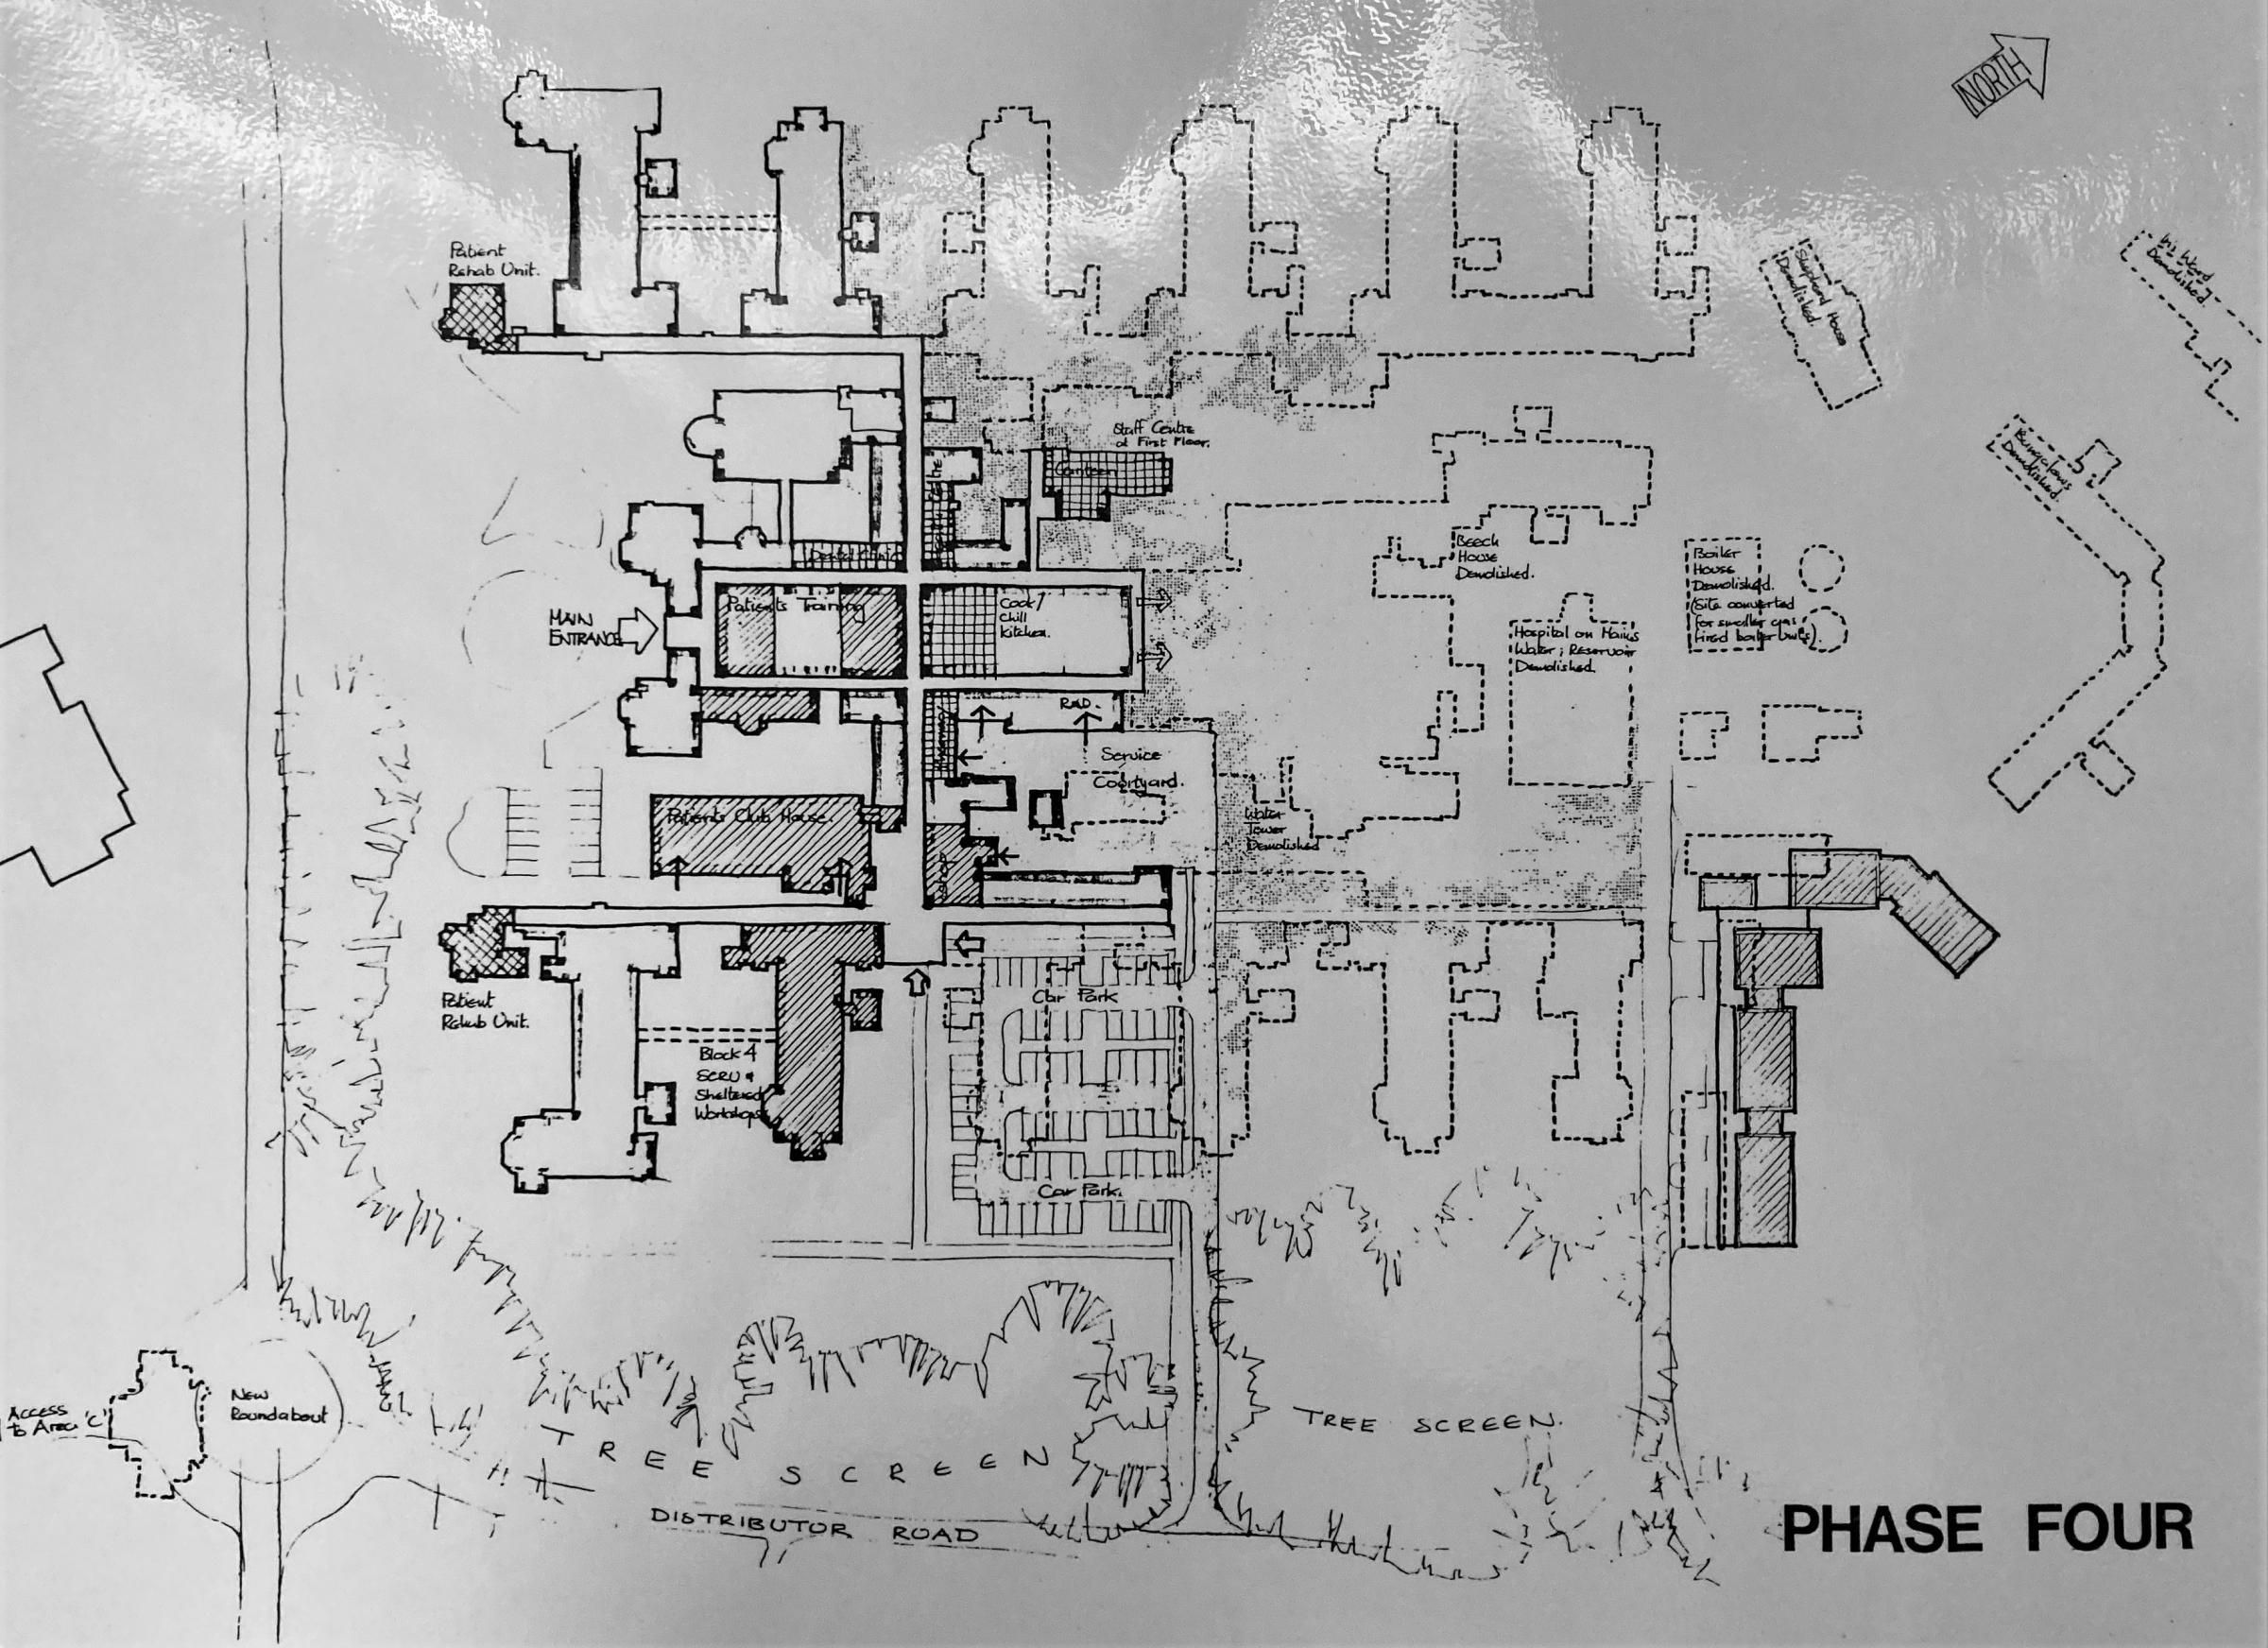 Phase Four of purposed plans to keep part of the Leavesden Hospital in operation - 1989